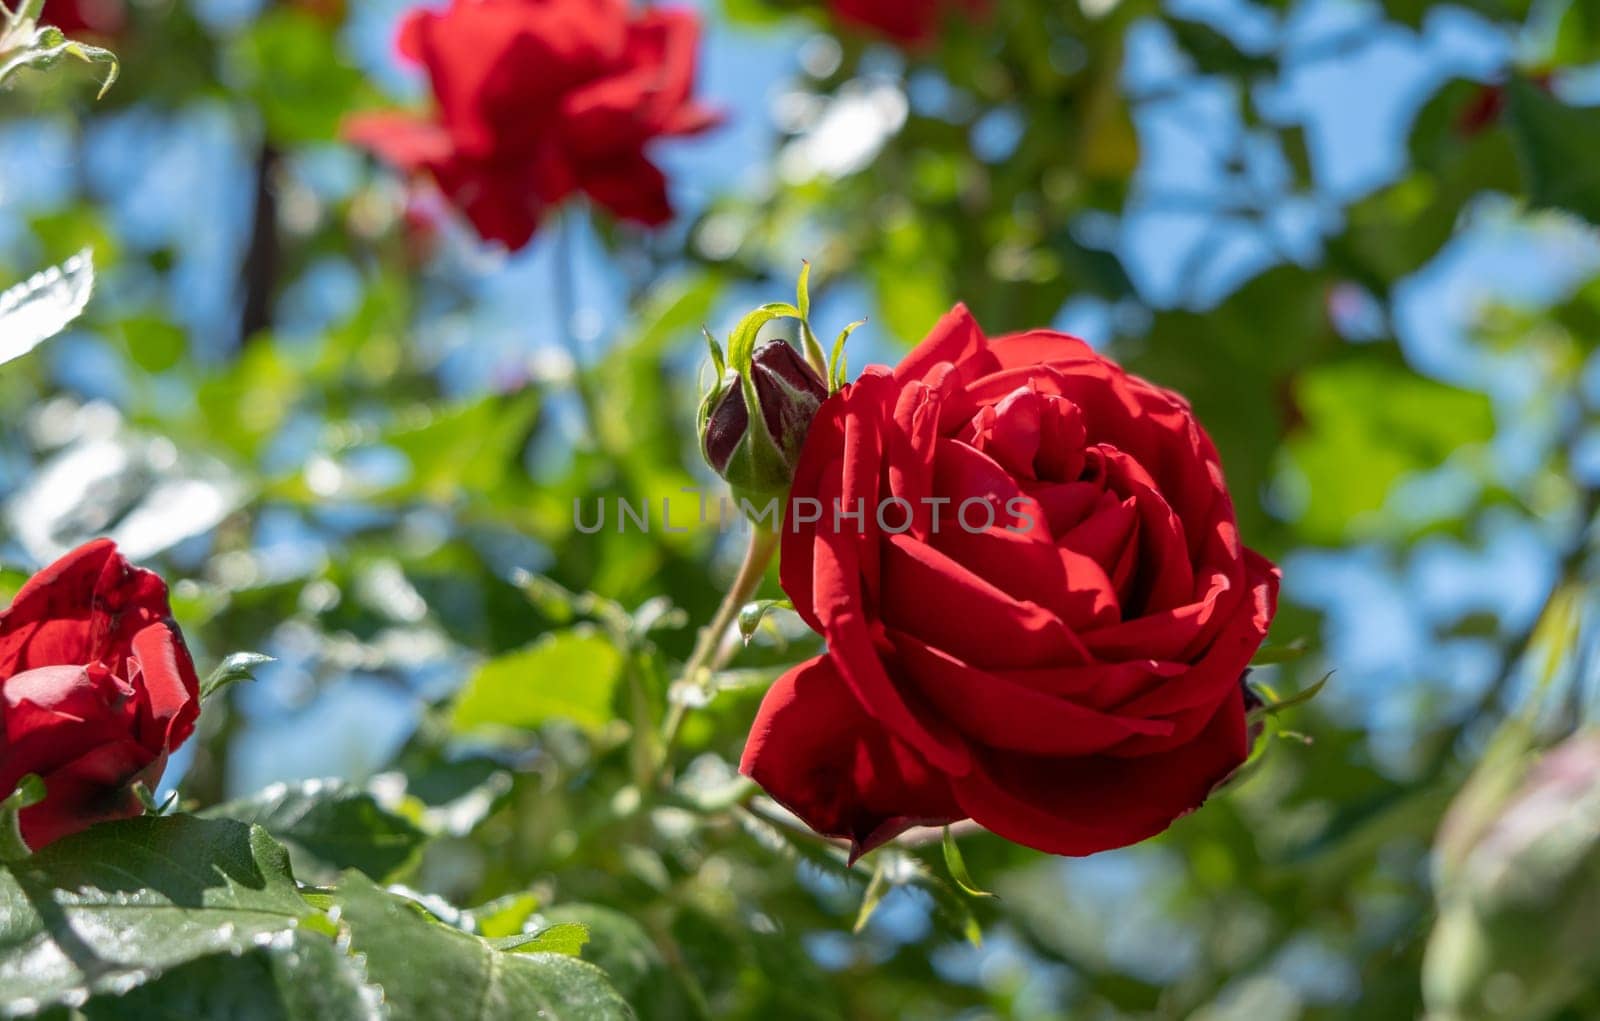 Beautiful red Rose blooming in summer garden. Roses flowers, nature, blossoming by igor010